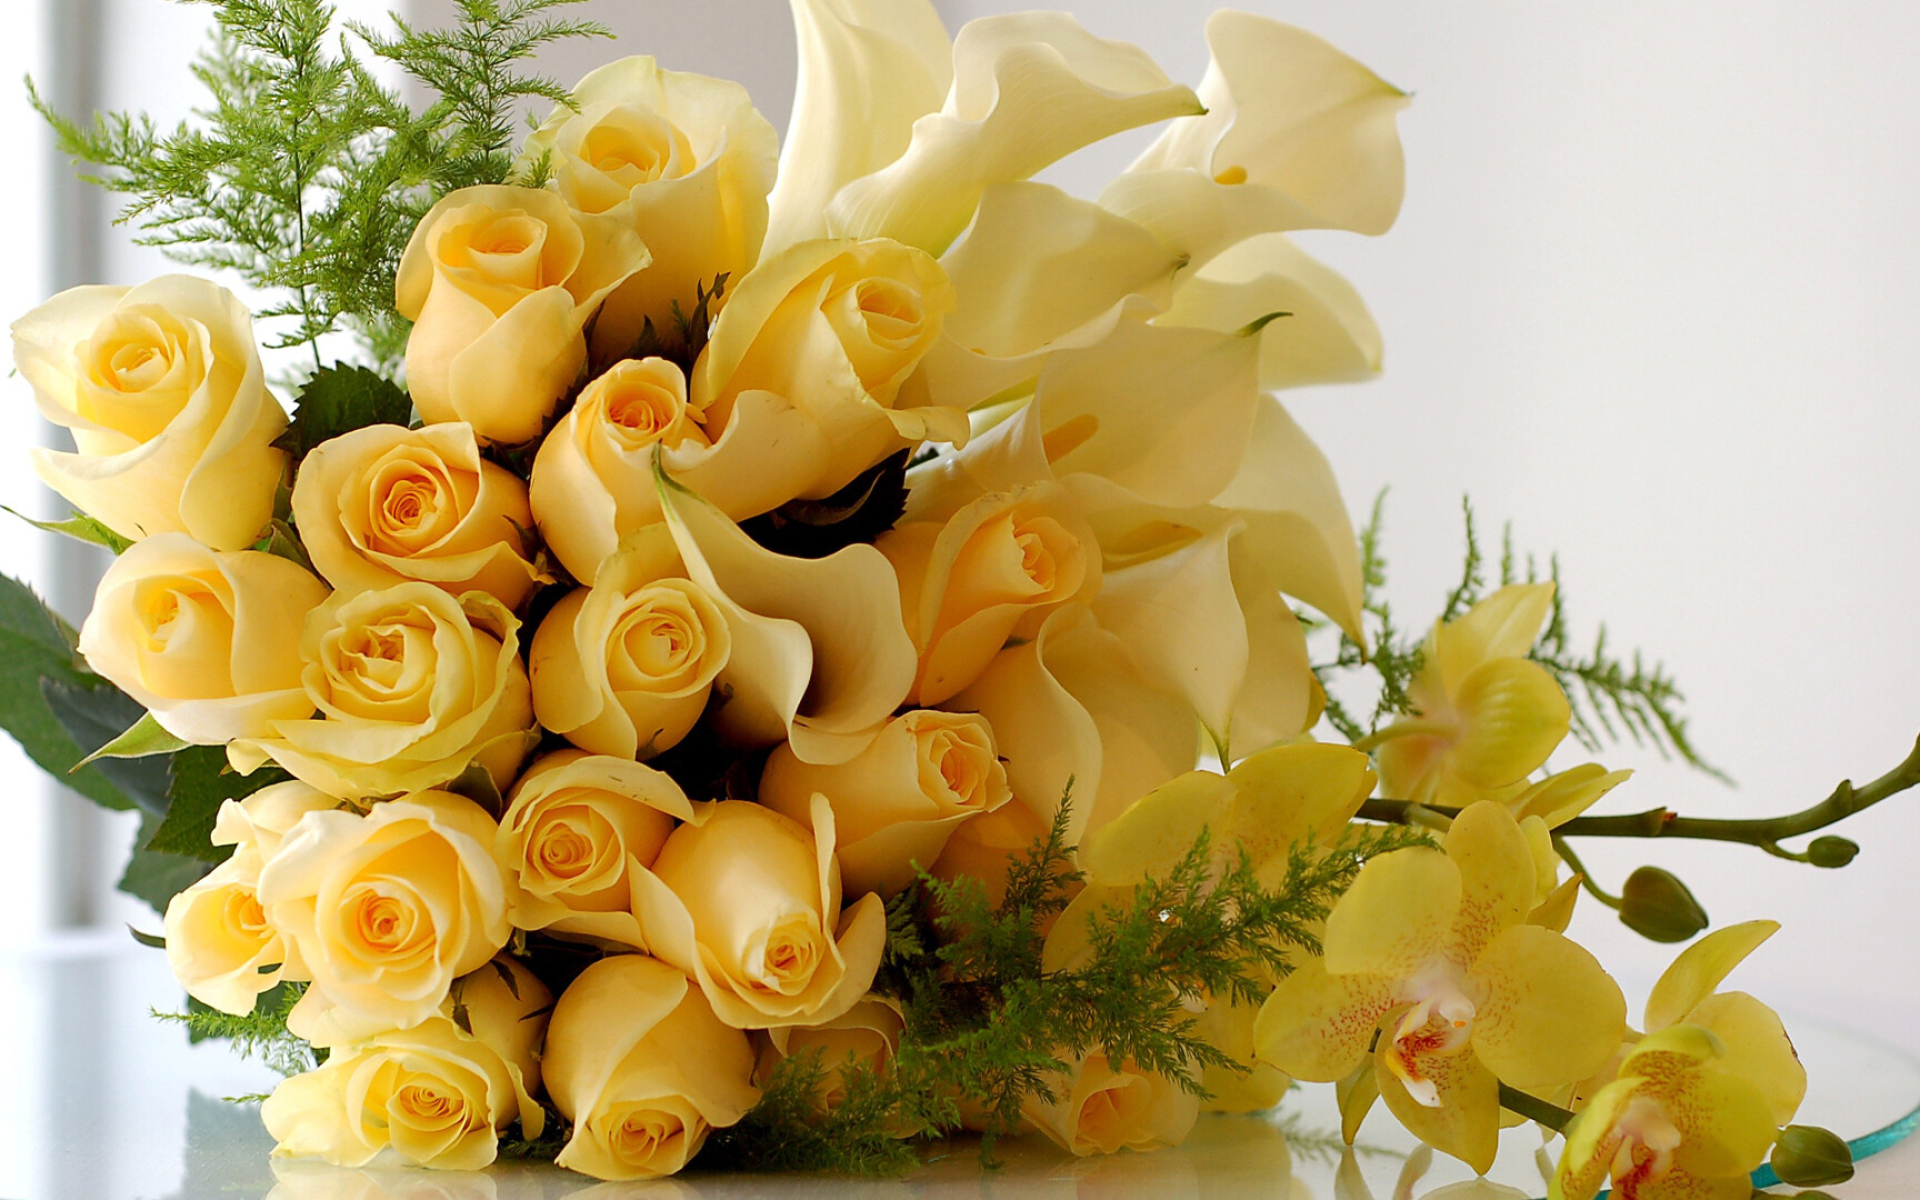 Flower Bouquet: An attractively arranged bunch of flowers often given as a gift or carried by a bride or bridesmaids. 1920x1200 HD Background.